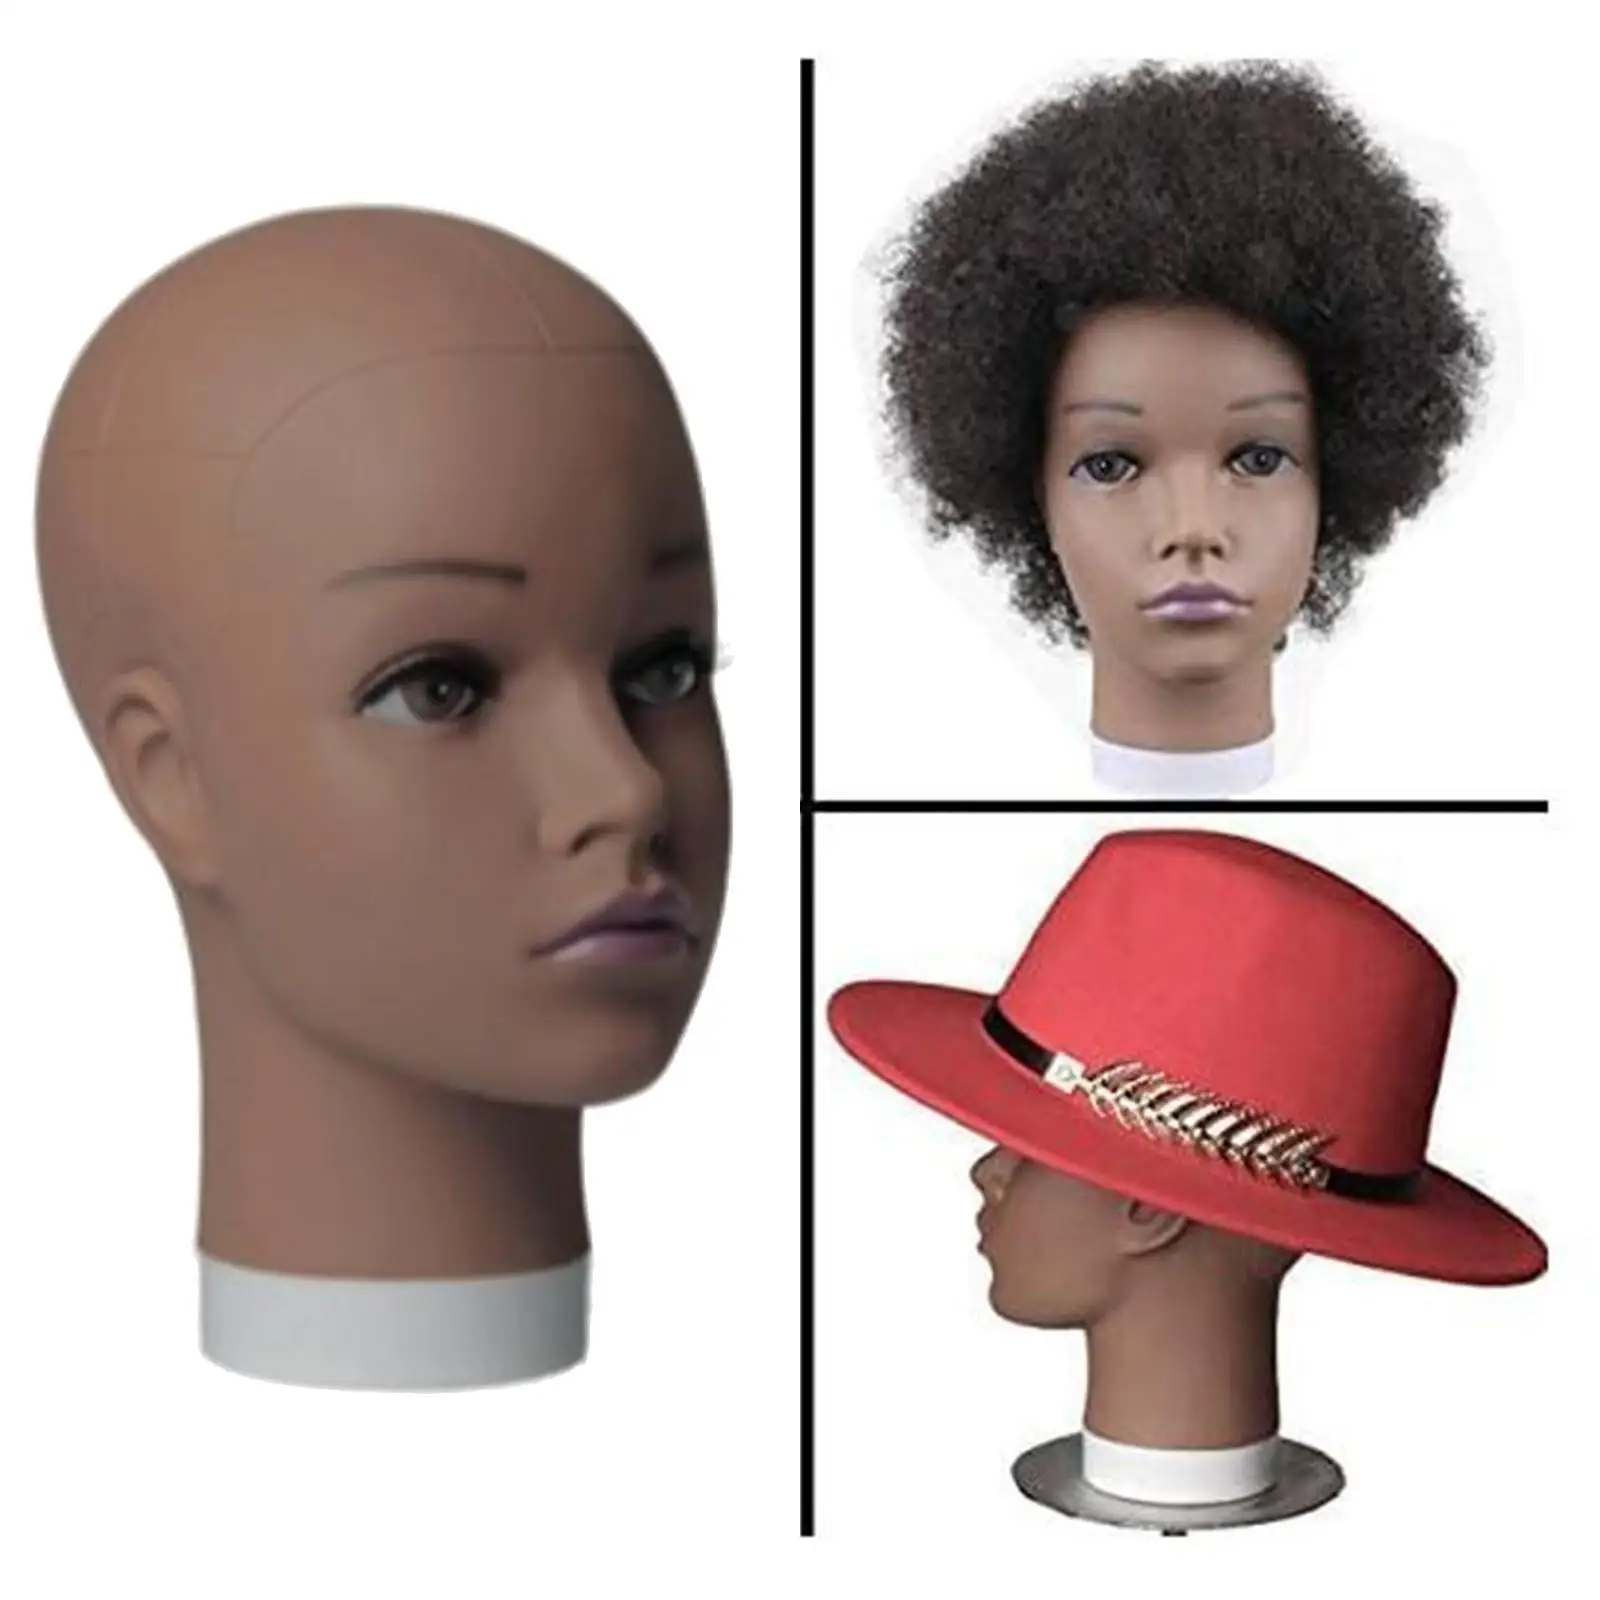  Head Model Bald Cosmetology Professional for Display Hat Making Wigs Training Scarf Headdress